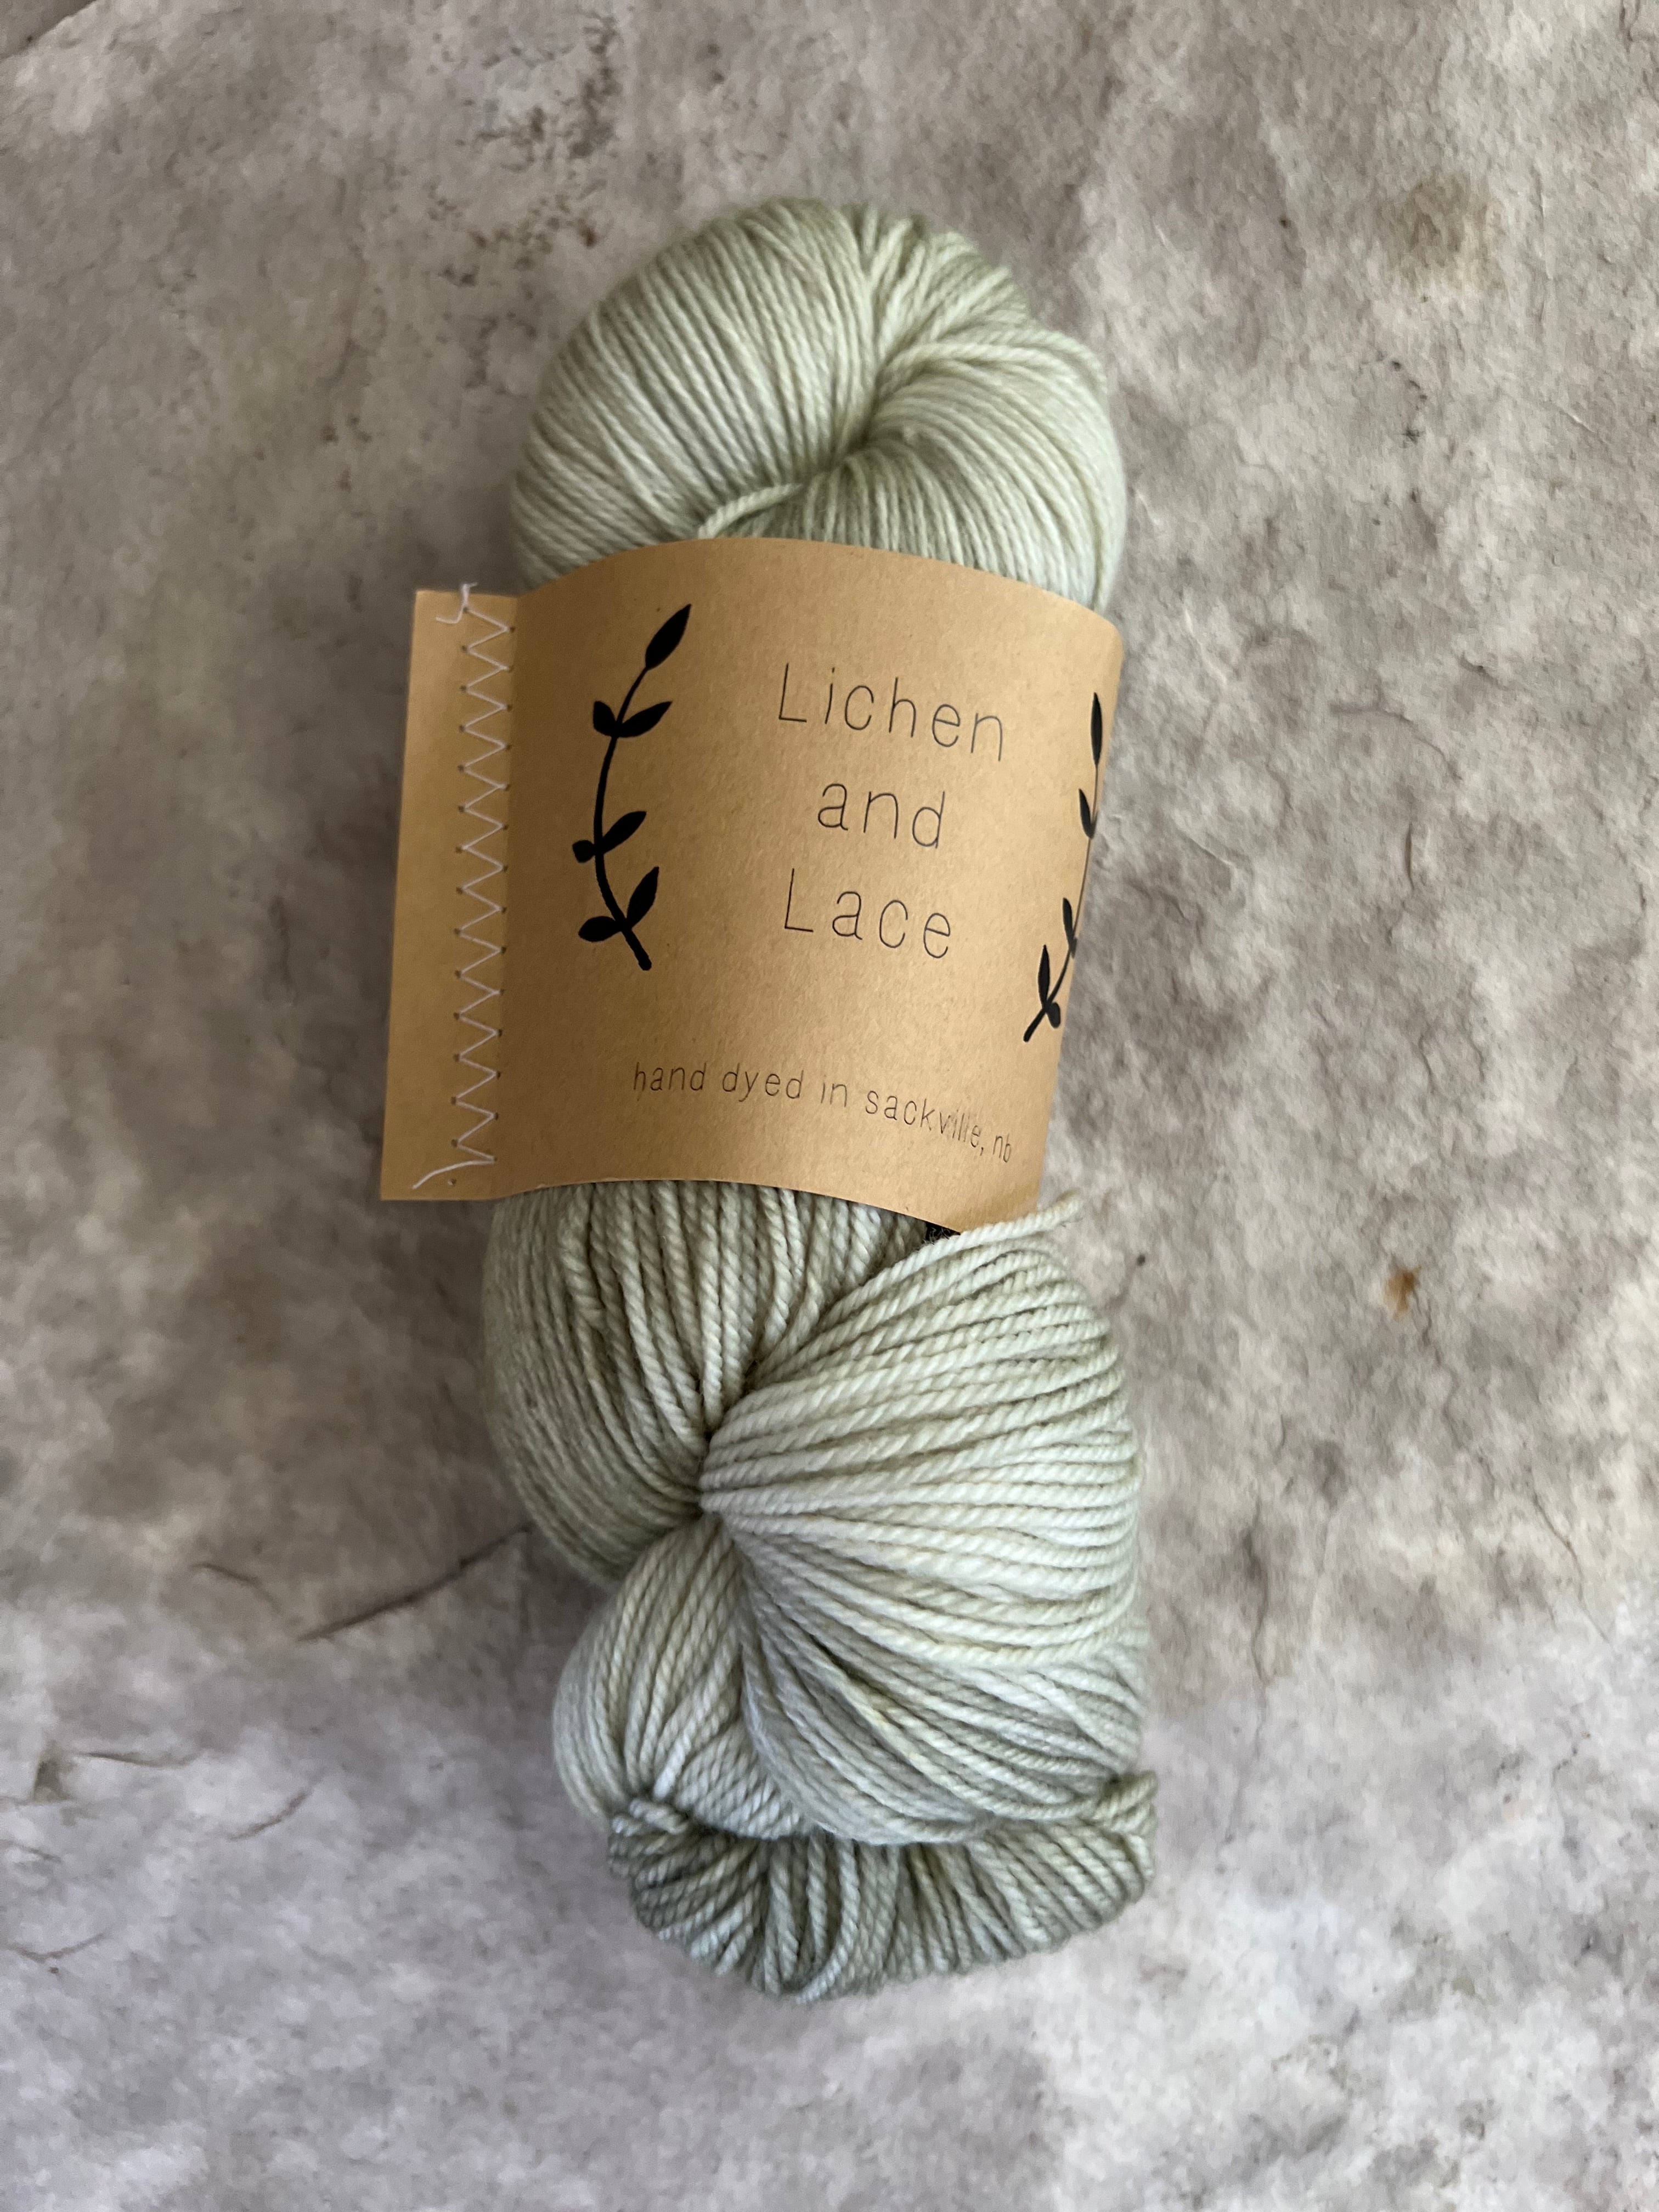 Lichen & Lace : Hand Dyed Embroidery Yarn, Lichen and Lace …